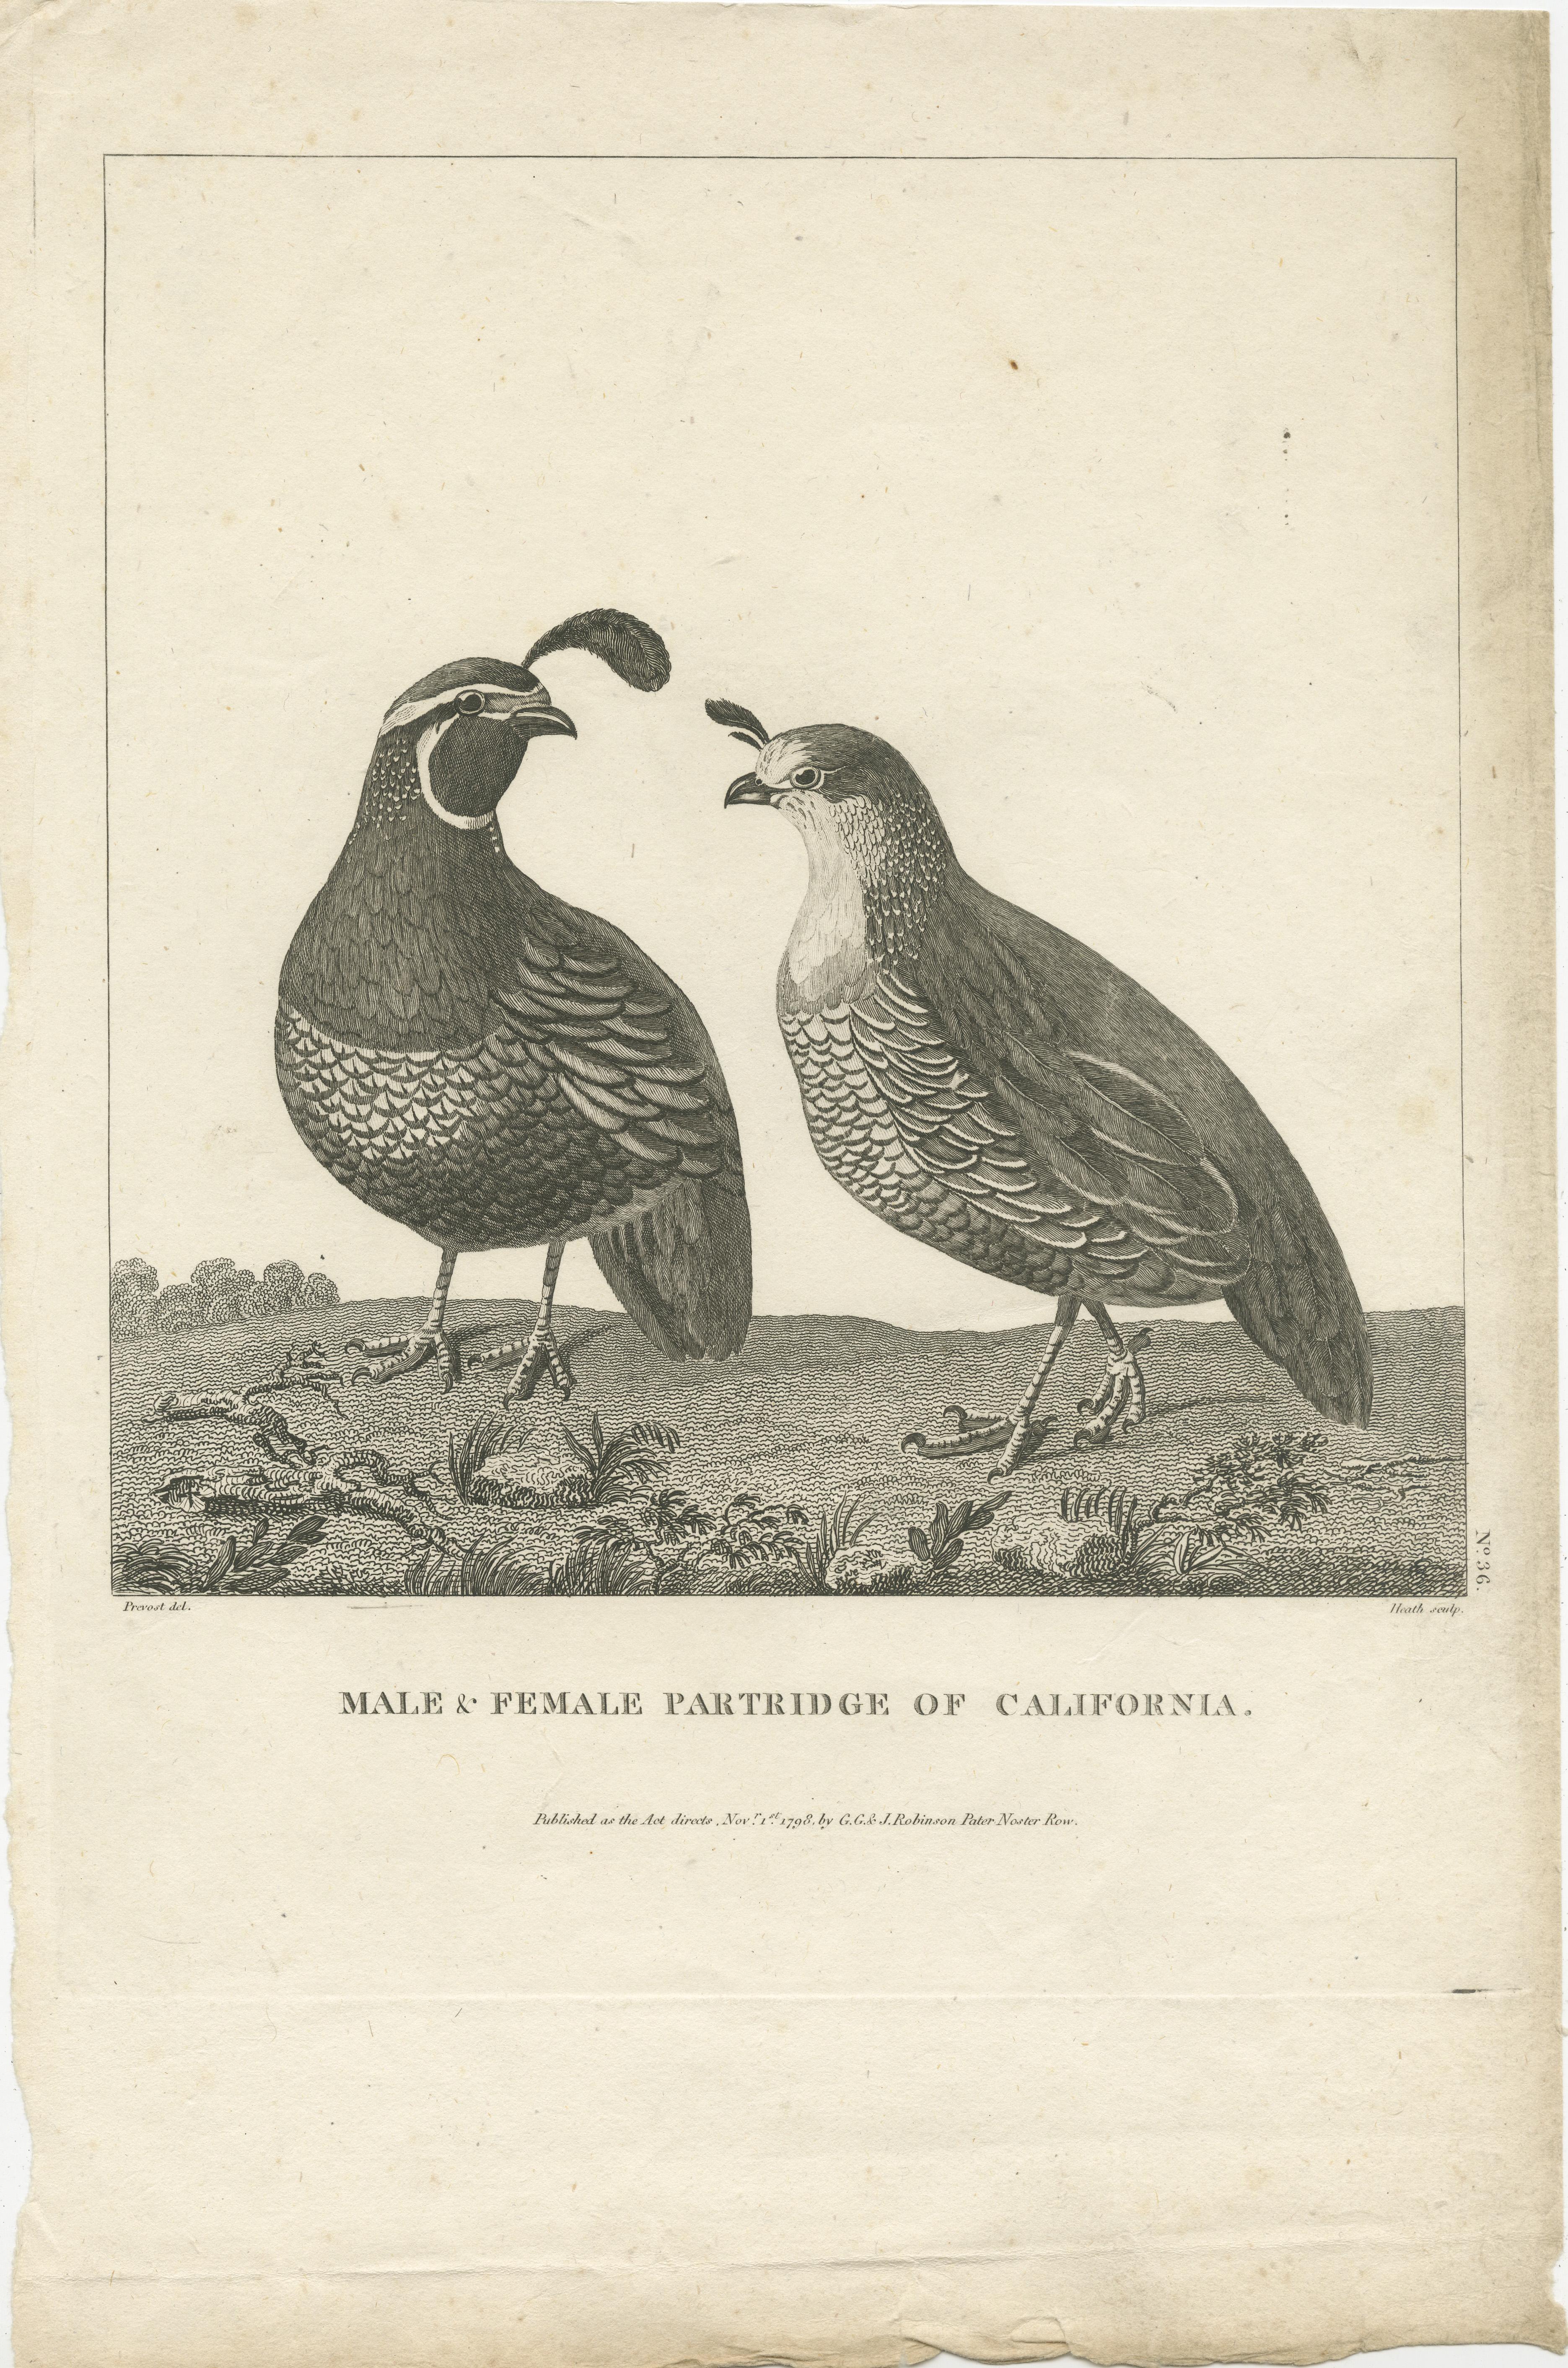 Antique print titled 'Male & Female Partridge of California'. Male and Female Partridge of California. Originates from 'Charts And Plates To La Perouse's Voyage'. Published 1799.